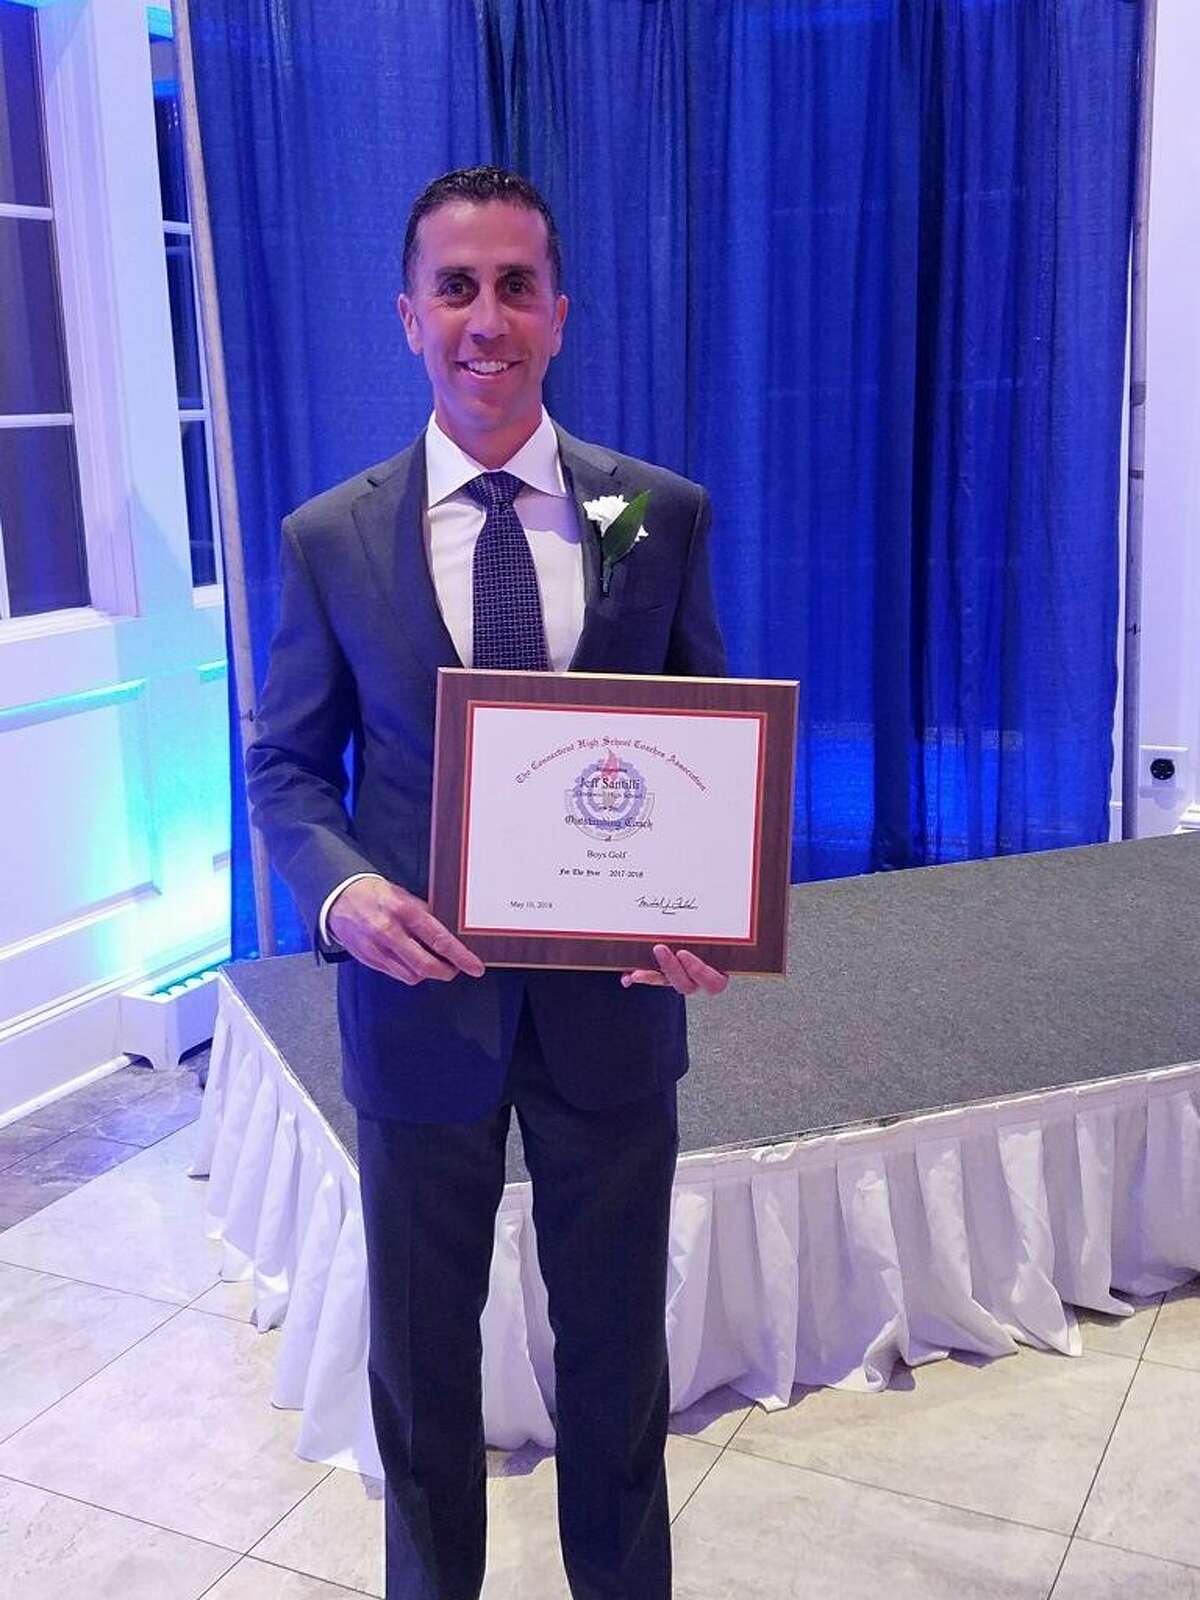 Greenwich coach Jeff Santilli holds his plaque at 54th annual Recognition Dinner on May 10 at the Aqua Turf in Southington.